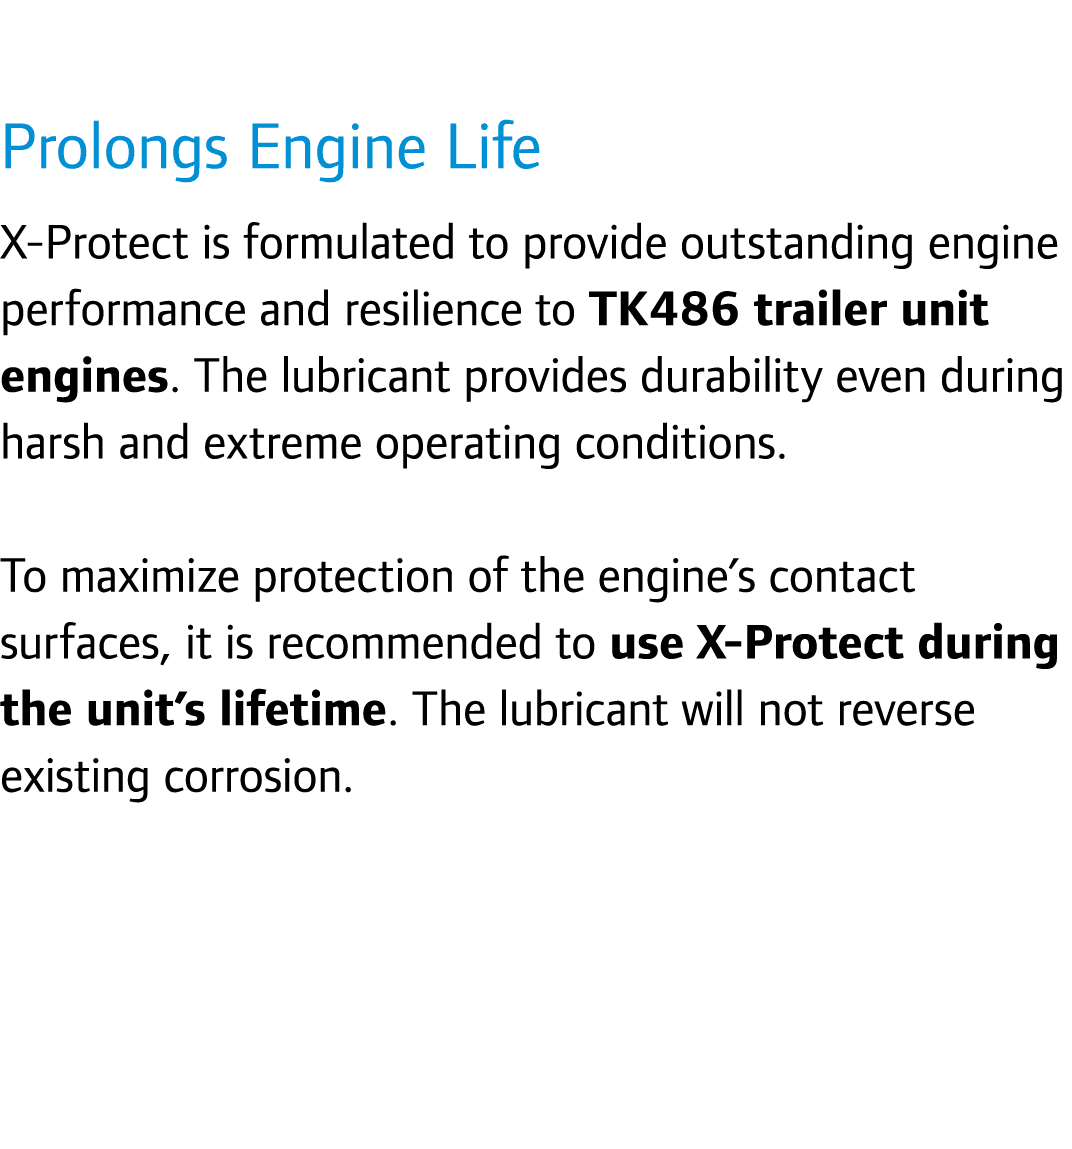 Prolongs Engine Life X-Protect is formulated to provide outstanding engine performance and resilience to TK486 traile...